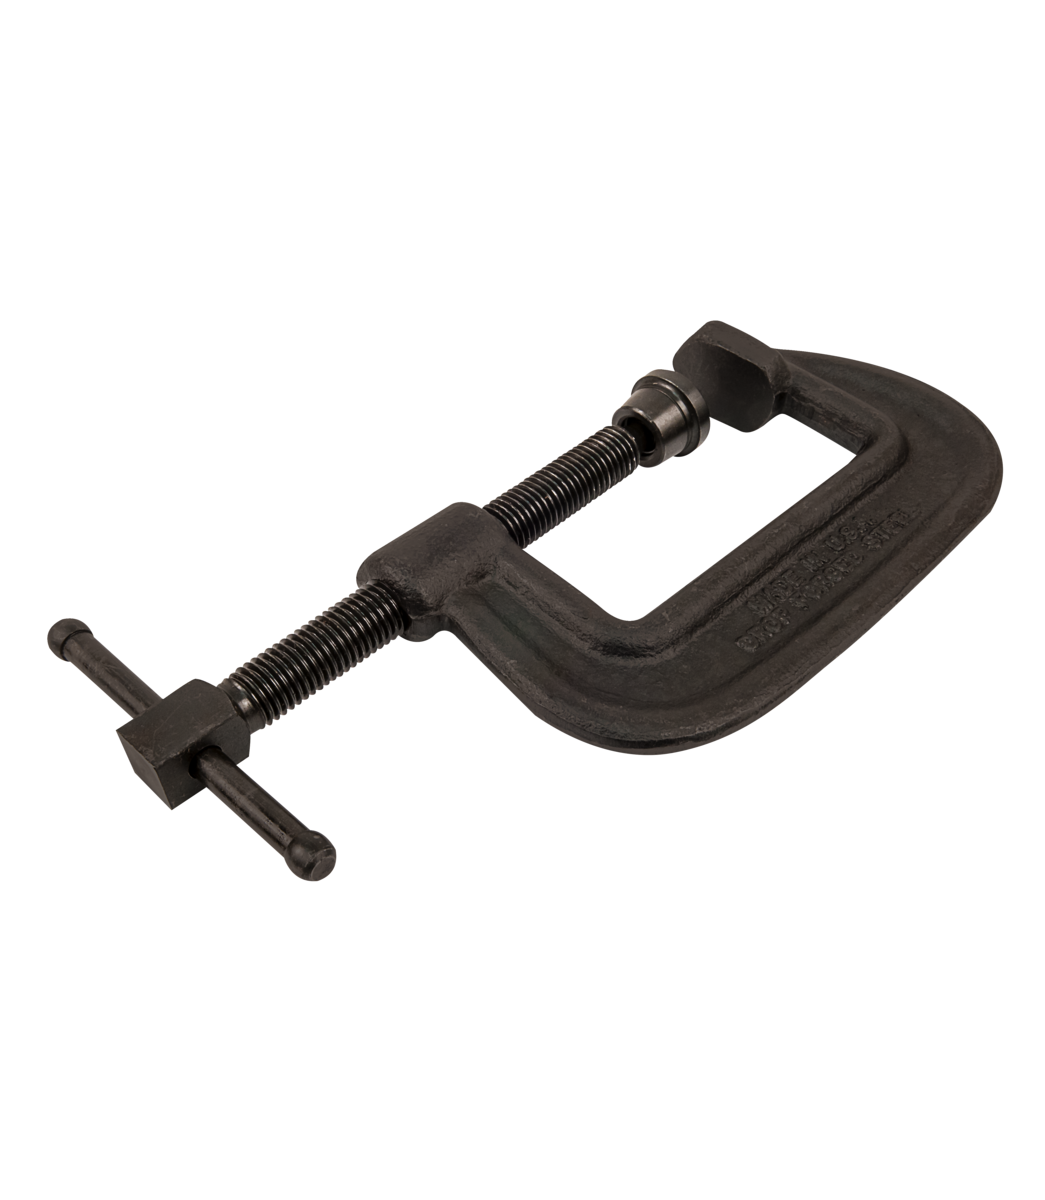 WILTON 100 Series Forged C-Clamp - Heavy-Duty 4-7/8 - 9-5/8” Opening Capacity